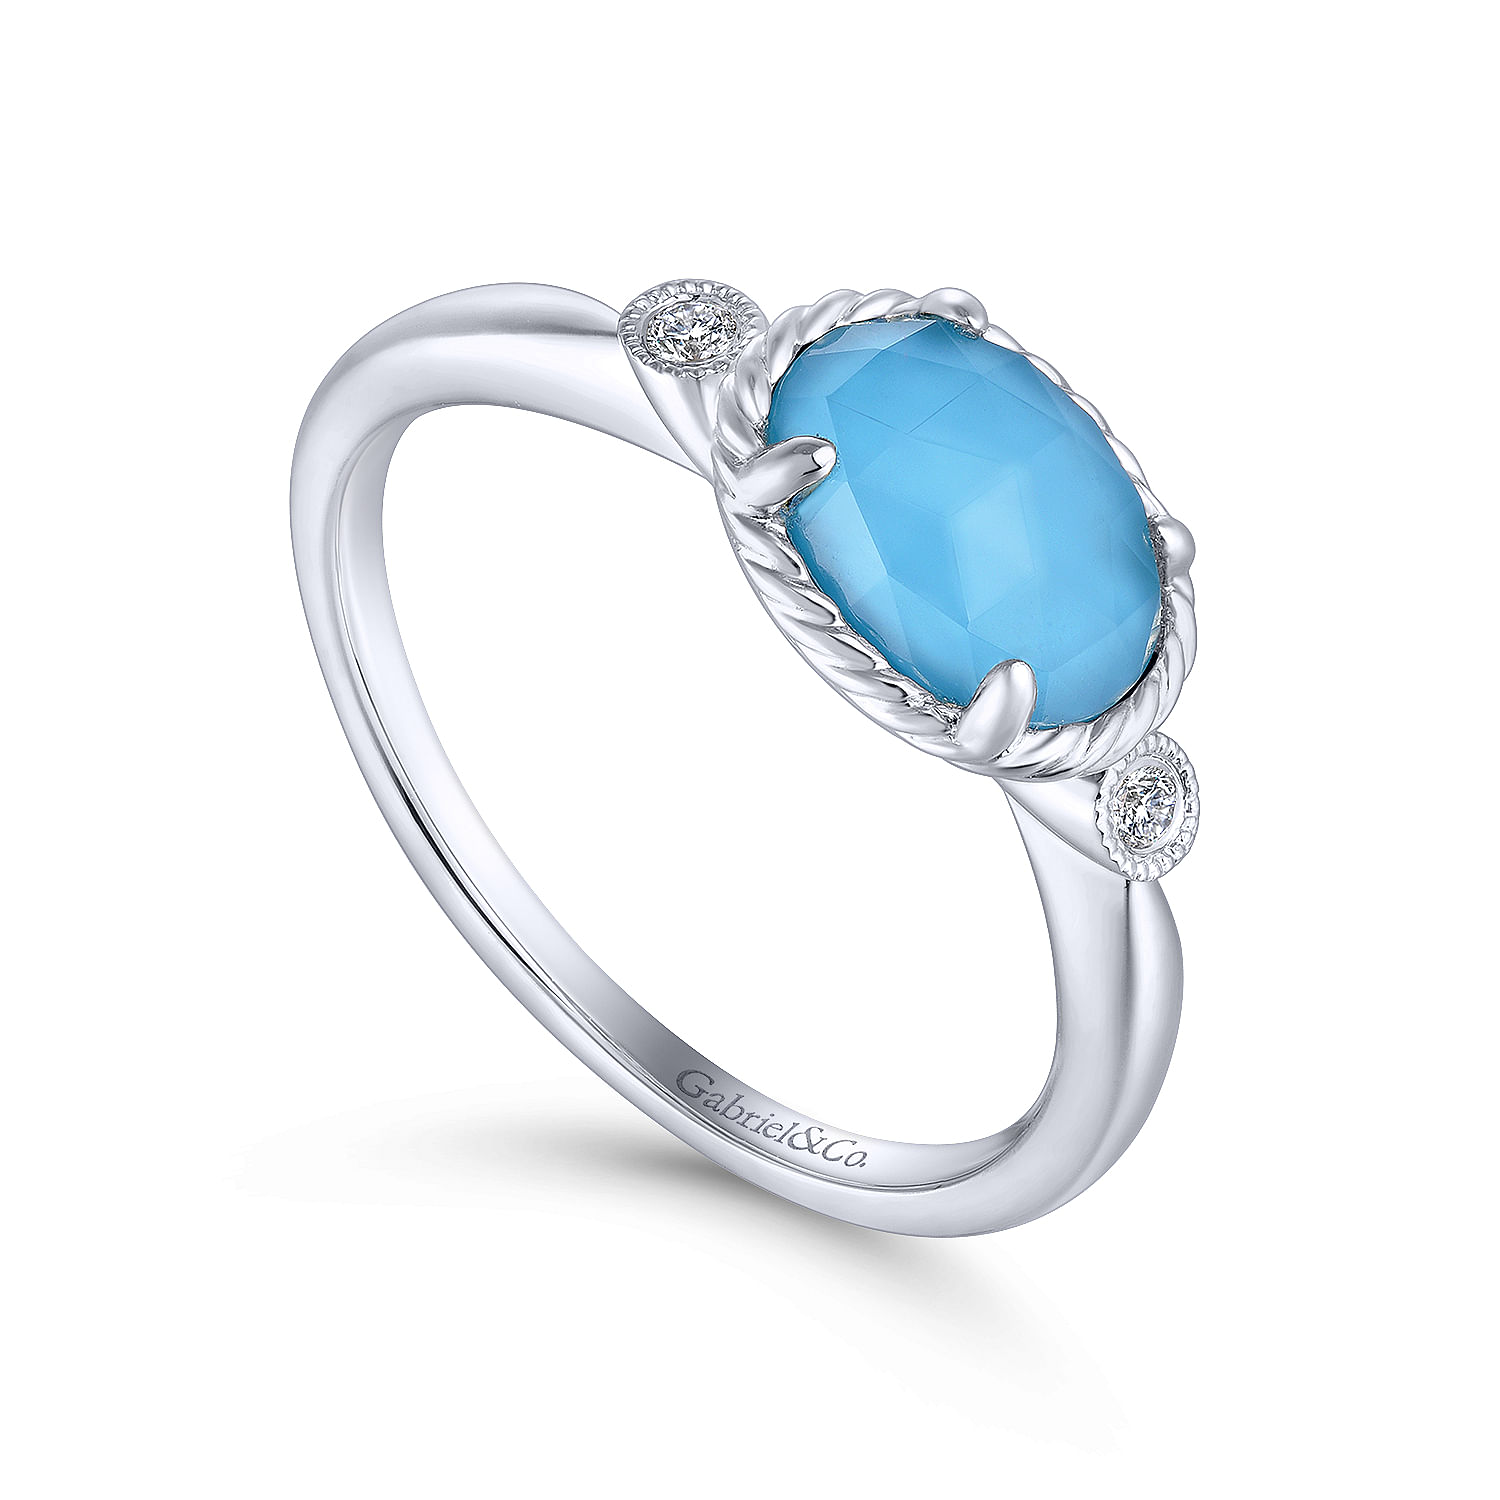 14K White Gold Oval Rock Crystal/Turquoise Diamond Ring